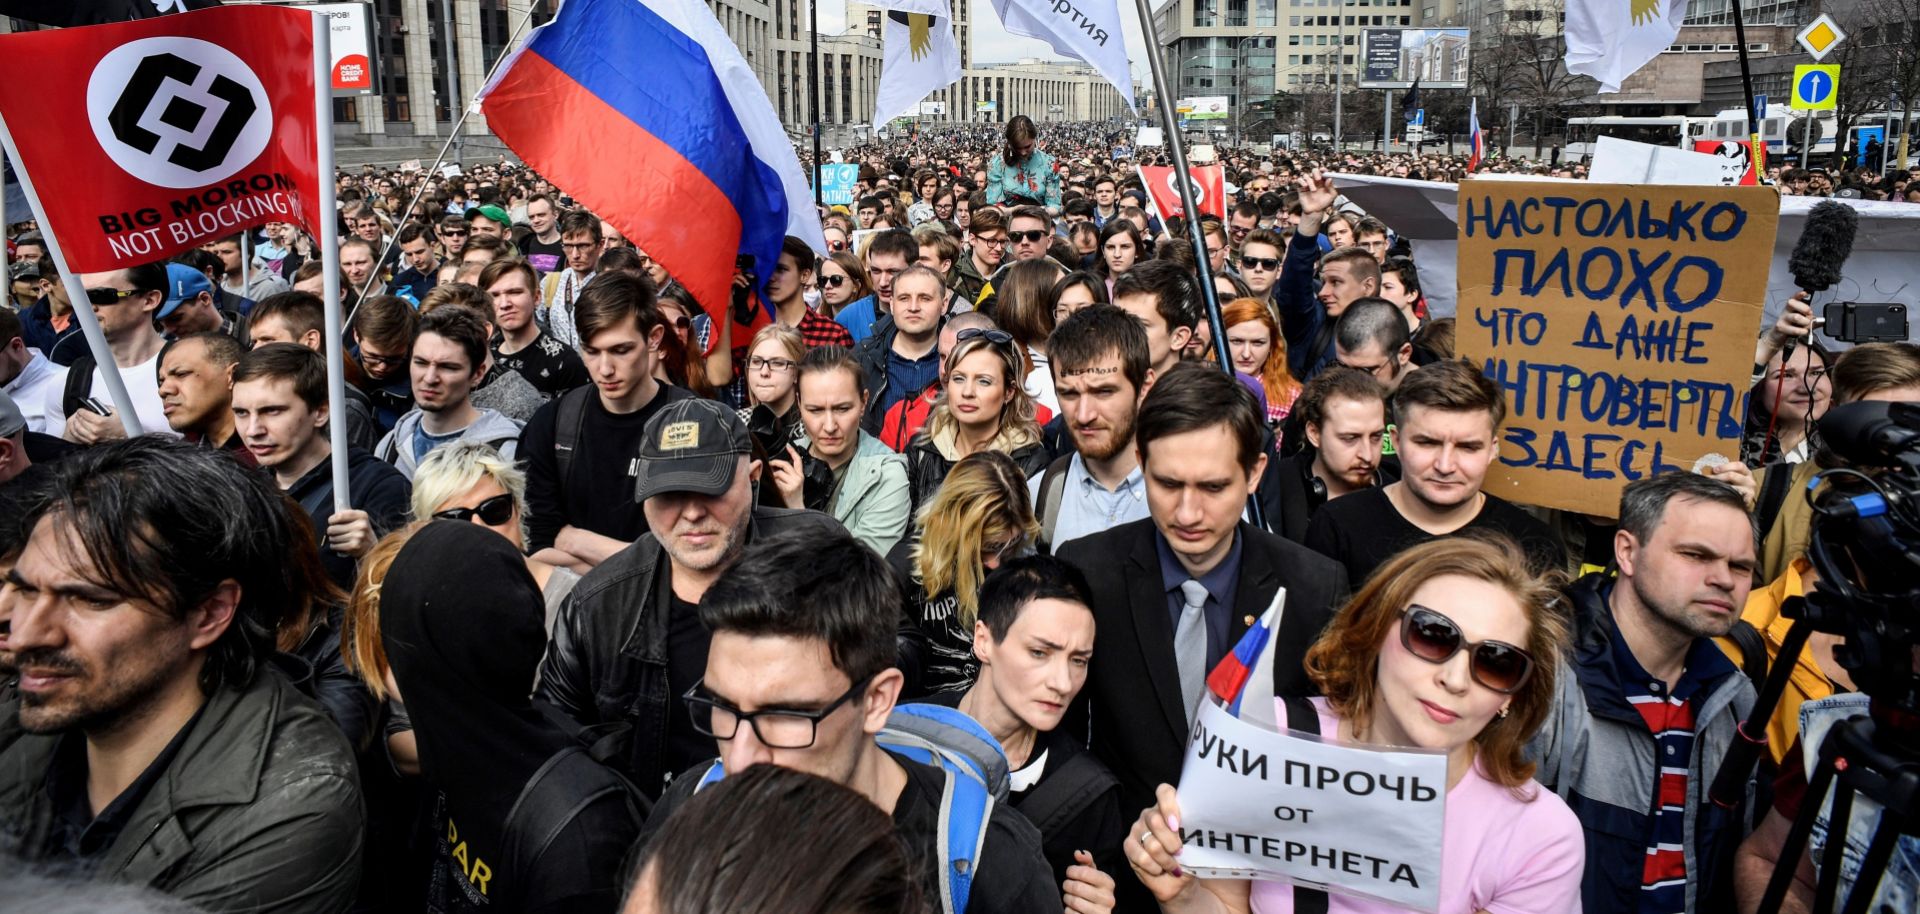 In this photograph, people in Moscow rally for internet freedom during April 2018.